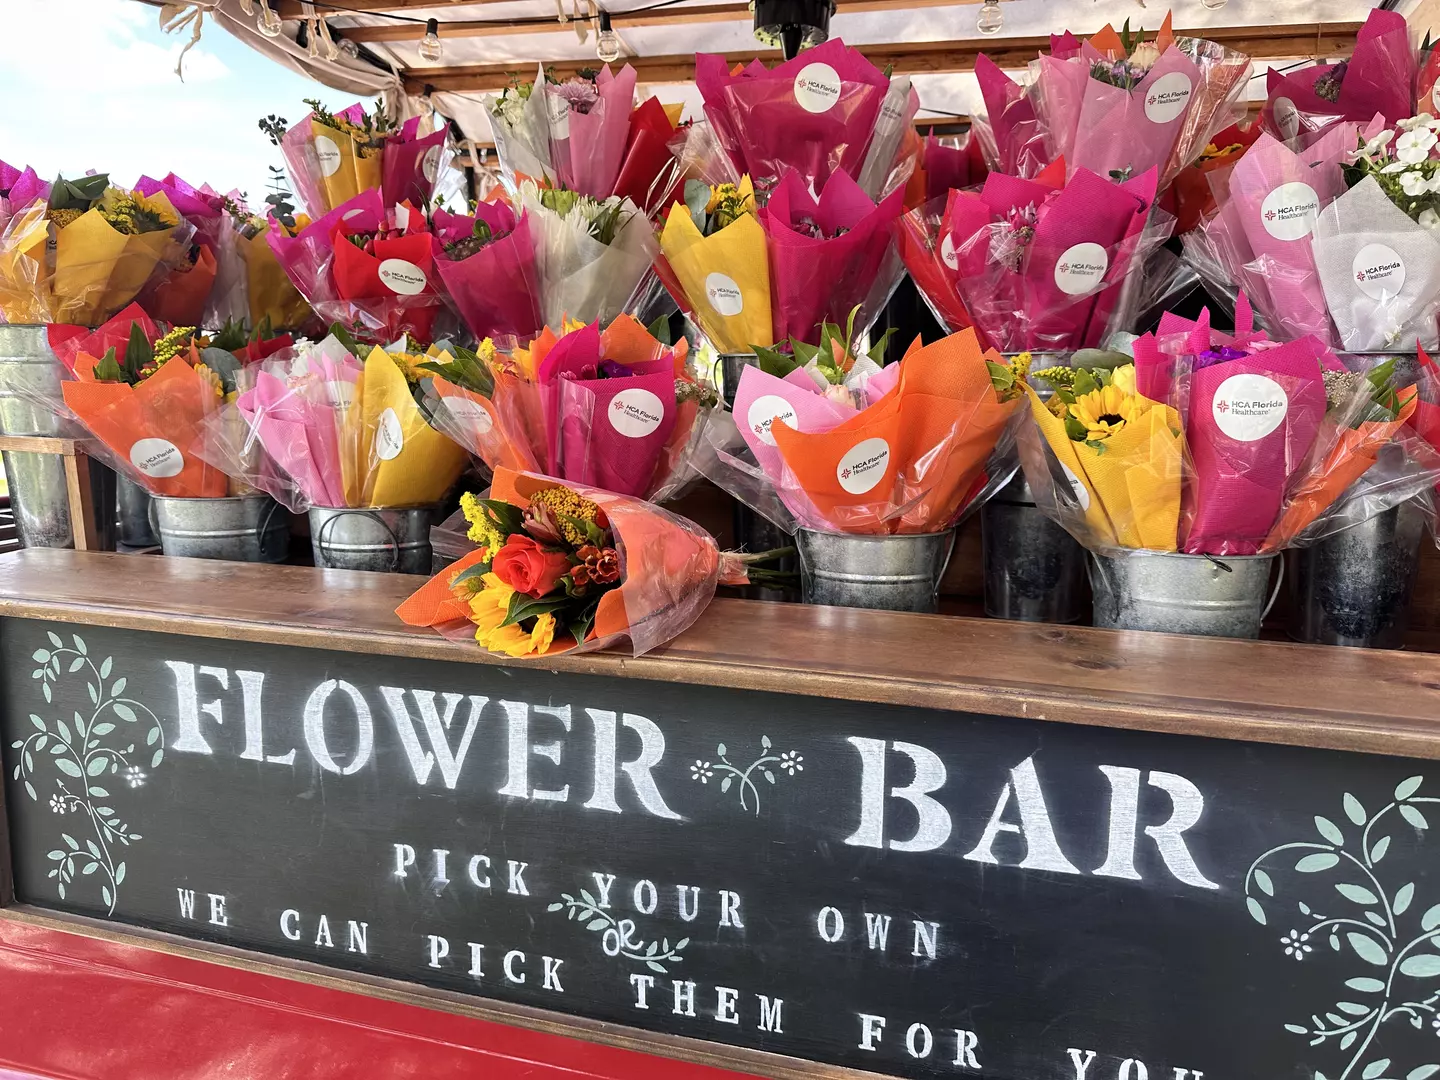 HCA Florida Healthcare hospitals hosted a flower bar for guests of the City of North Port's 65th birthday event.